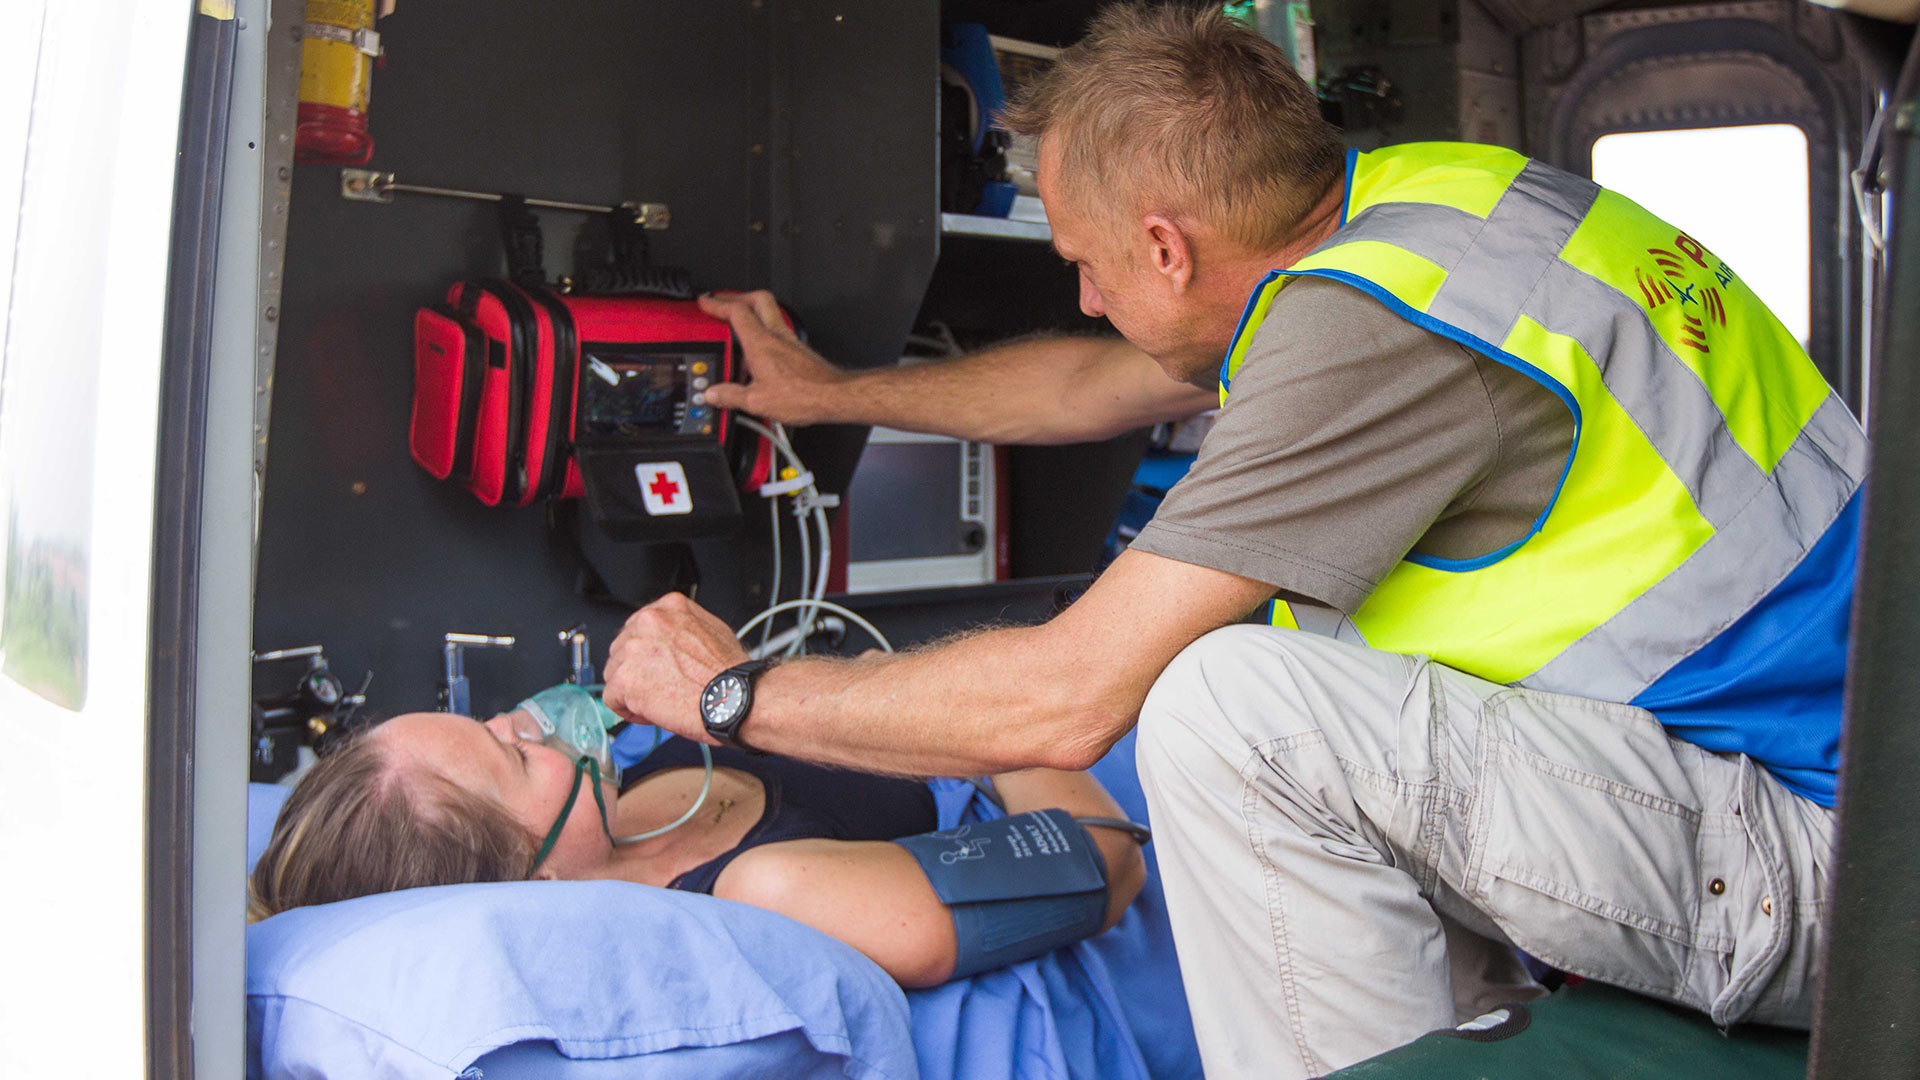 Priority Air Ambulance Unveils First Responder Capability